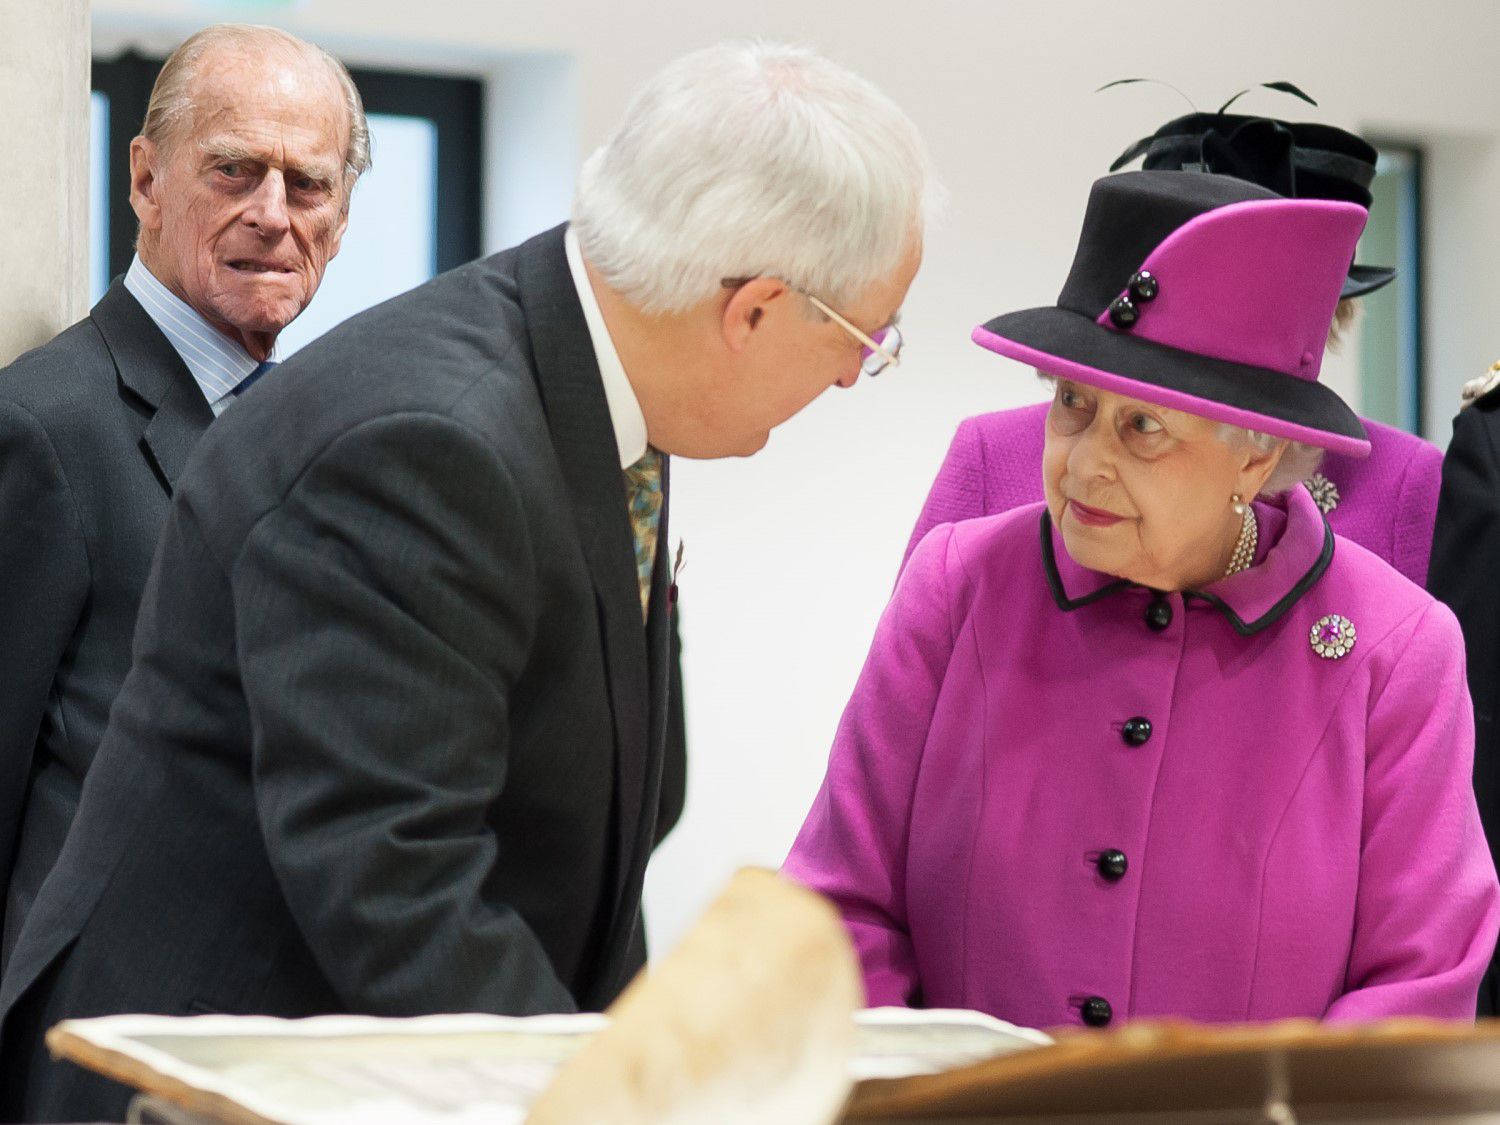 Chris Whittick, Senior Archivist at East Sussex County Council, shows Her Majesty items from The Keep's archives